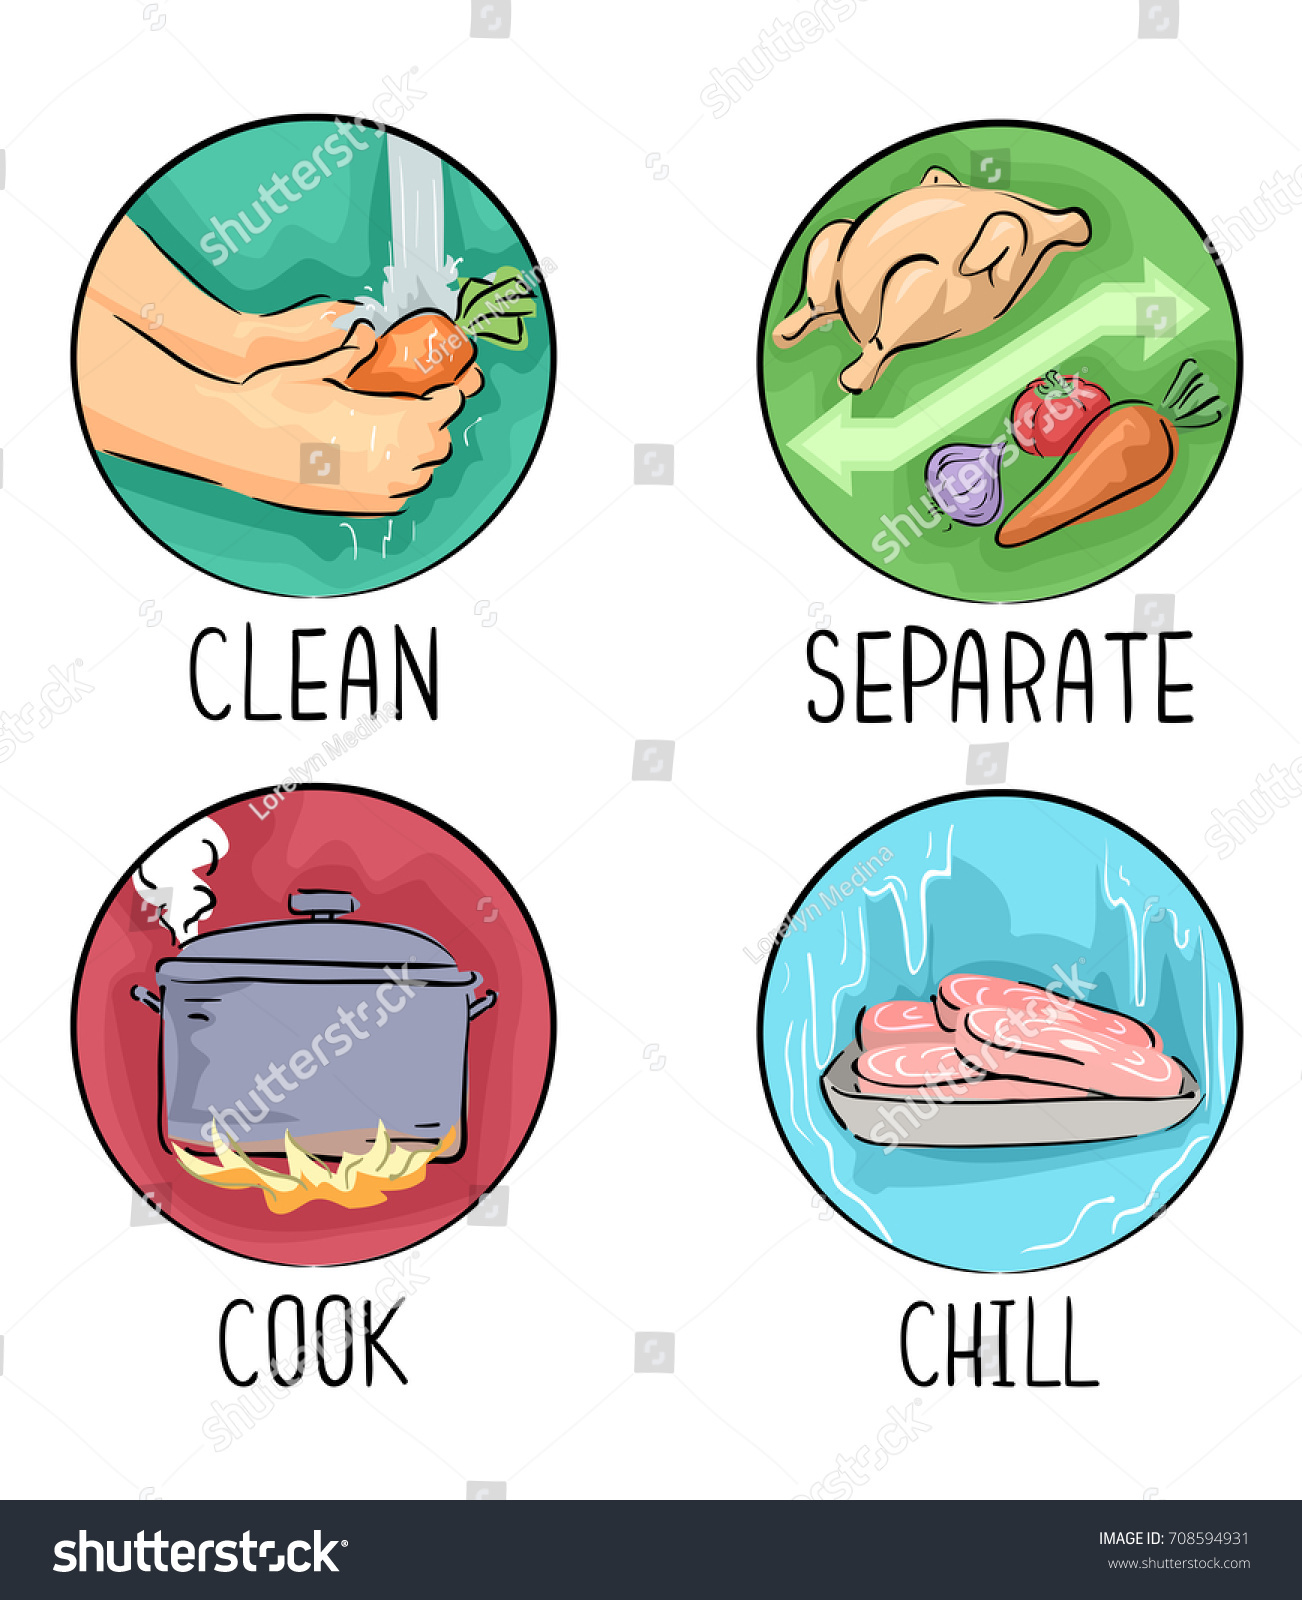 Illustration Food Handling Icons Clean Separate Stock ...